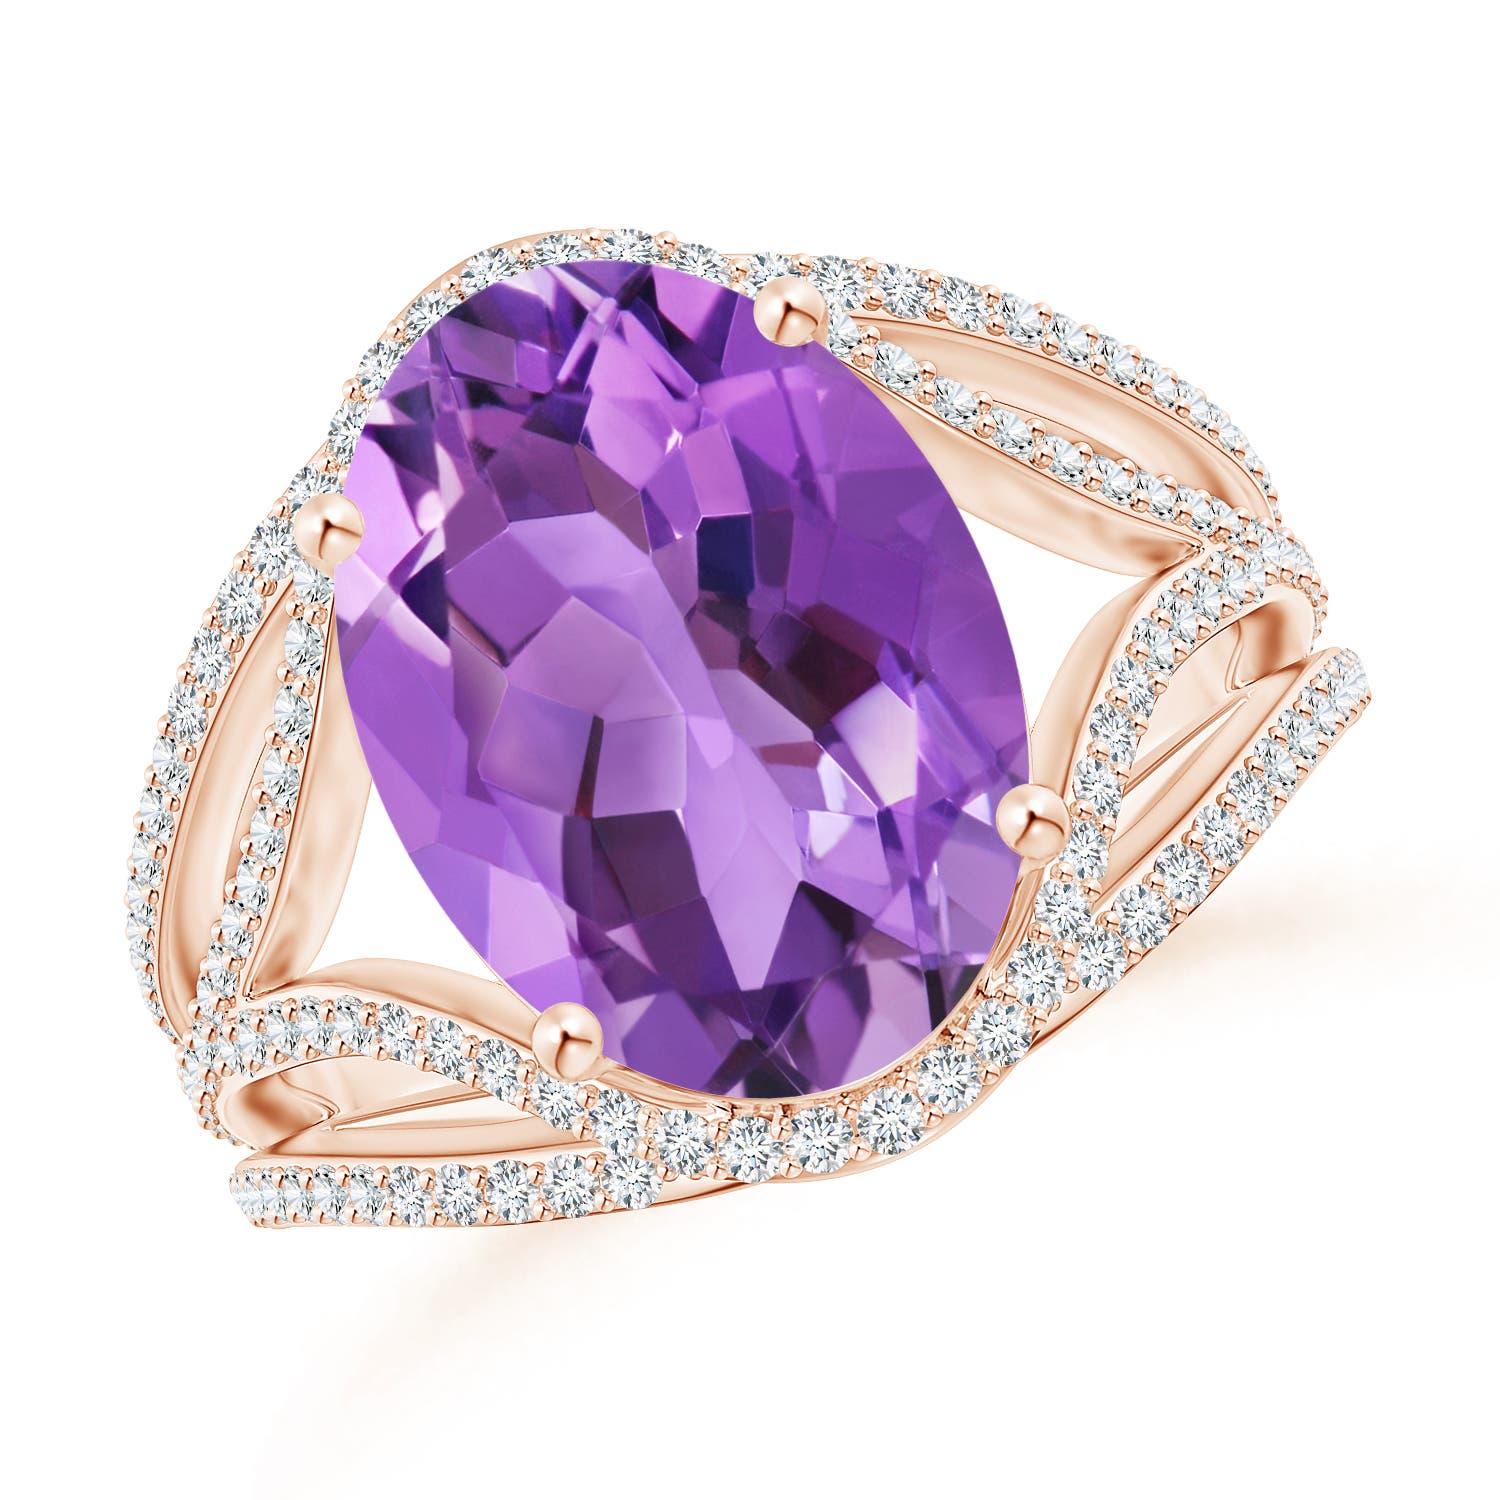 AA - Amethyst / 5.89 CT / 14 KT Rose Gold